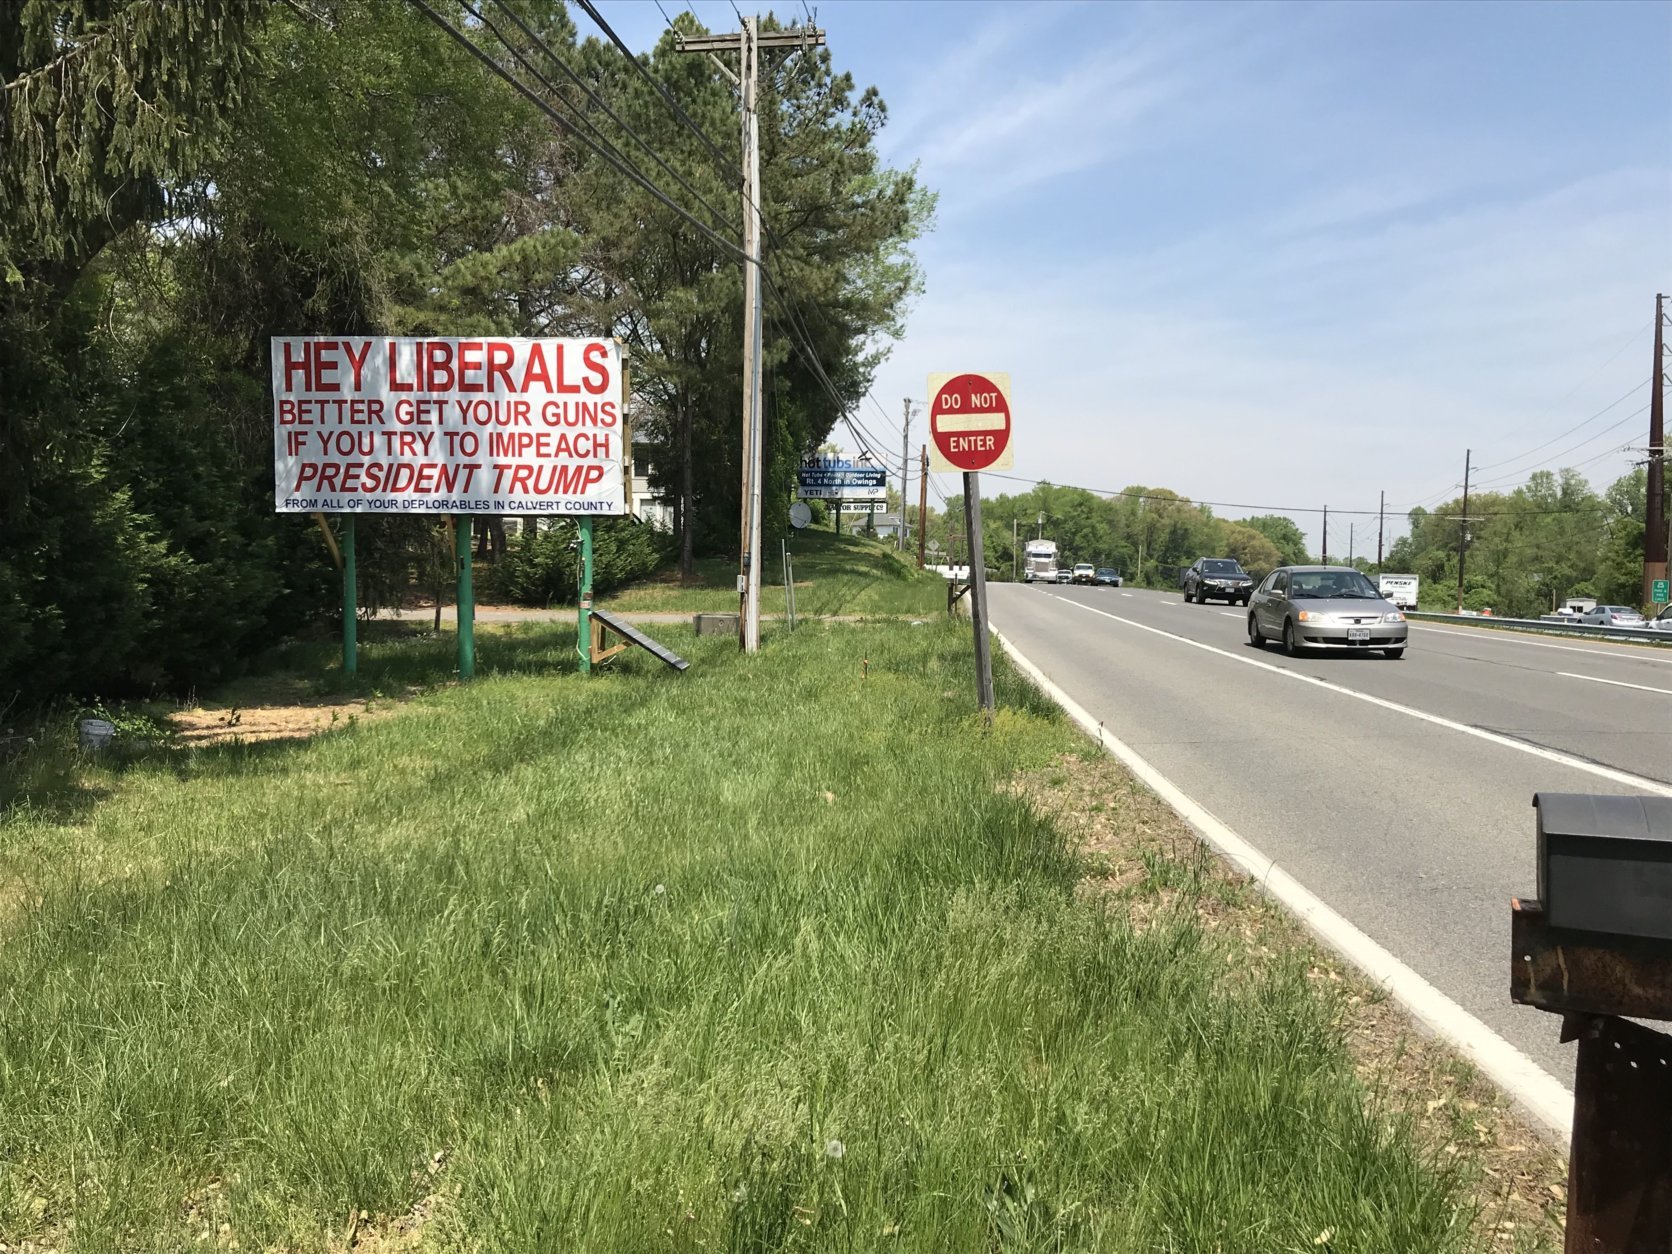 The sign went up recently along Maryland Route 4 at Bowie Shop Road in Calvert County, and is visible to northbound traffic. (WTOP/Michelle Basch)